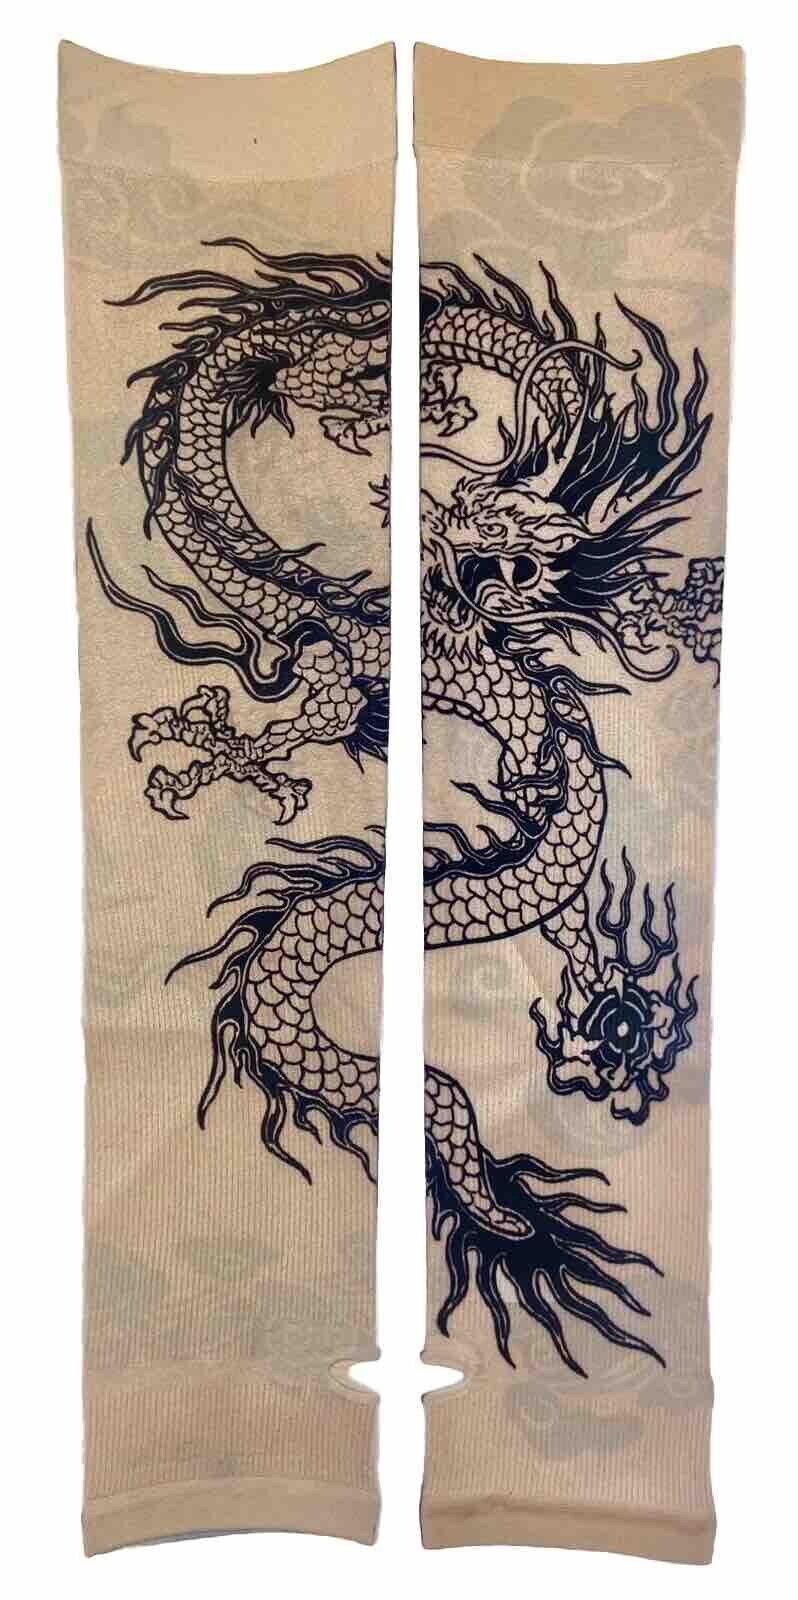 Rocco & Piper UV Protection Garden Hiking Sports Dragon Tattoo Arm Sleeve Rocco & Piper